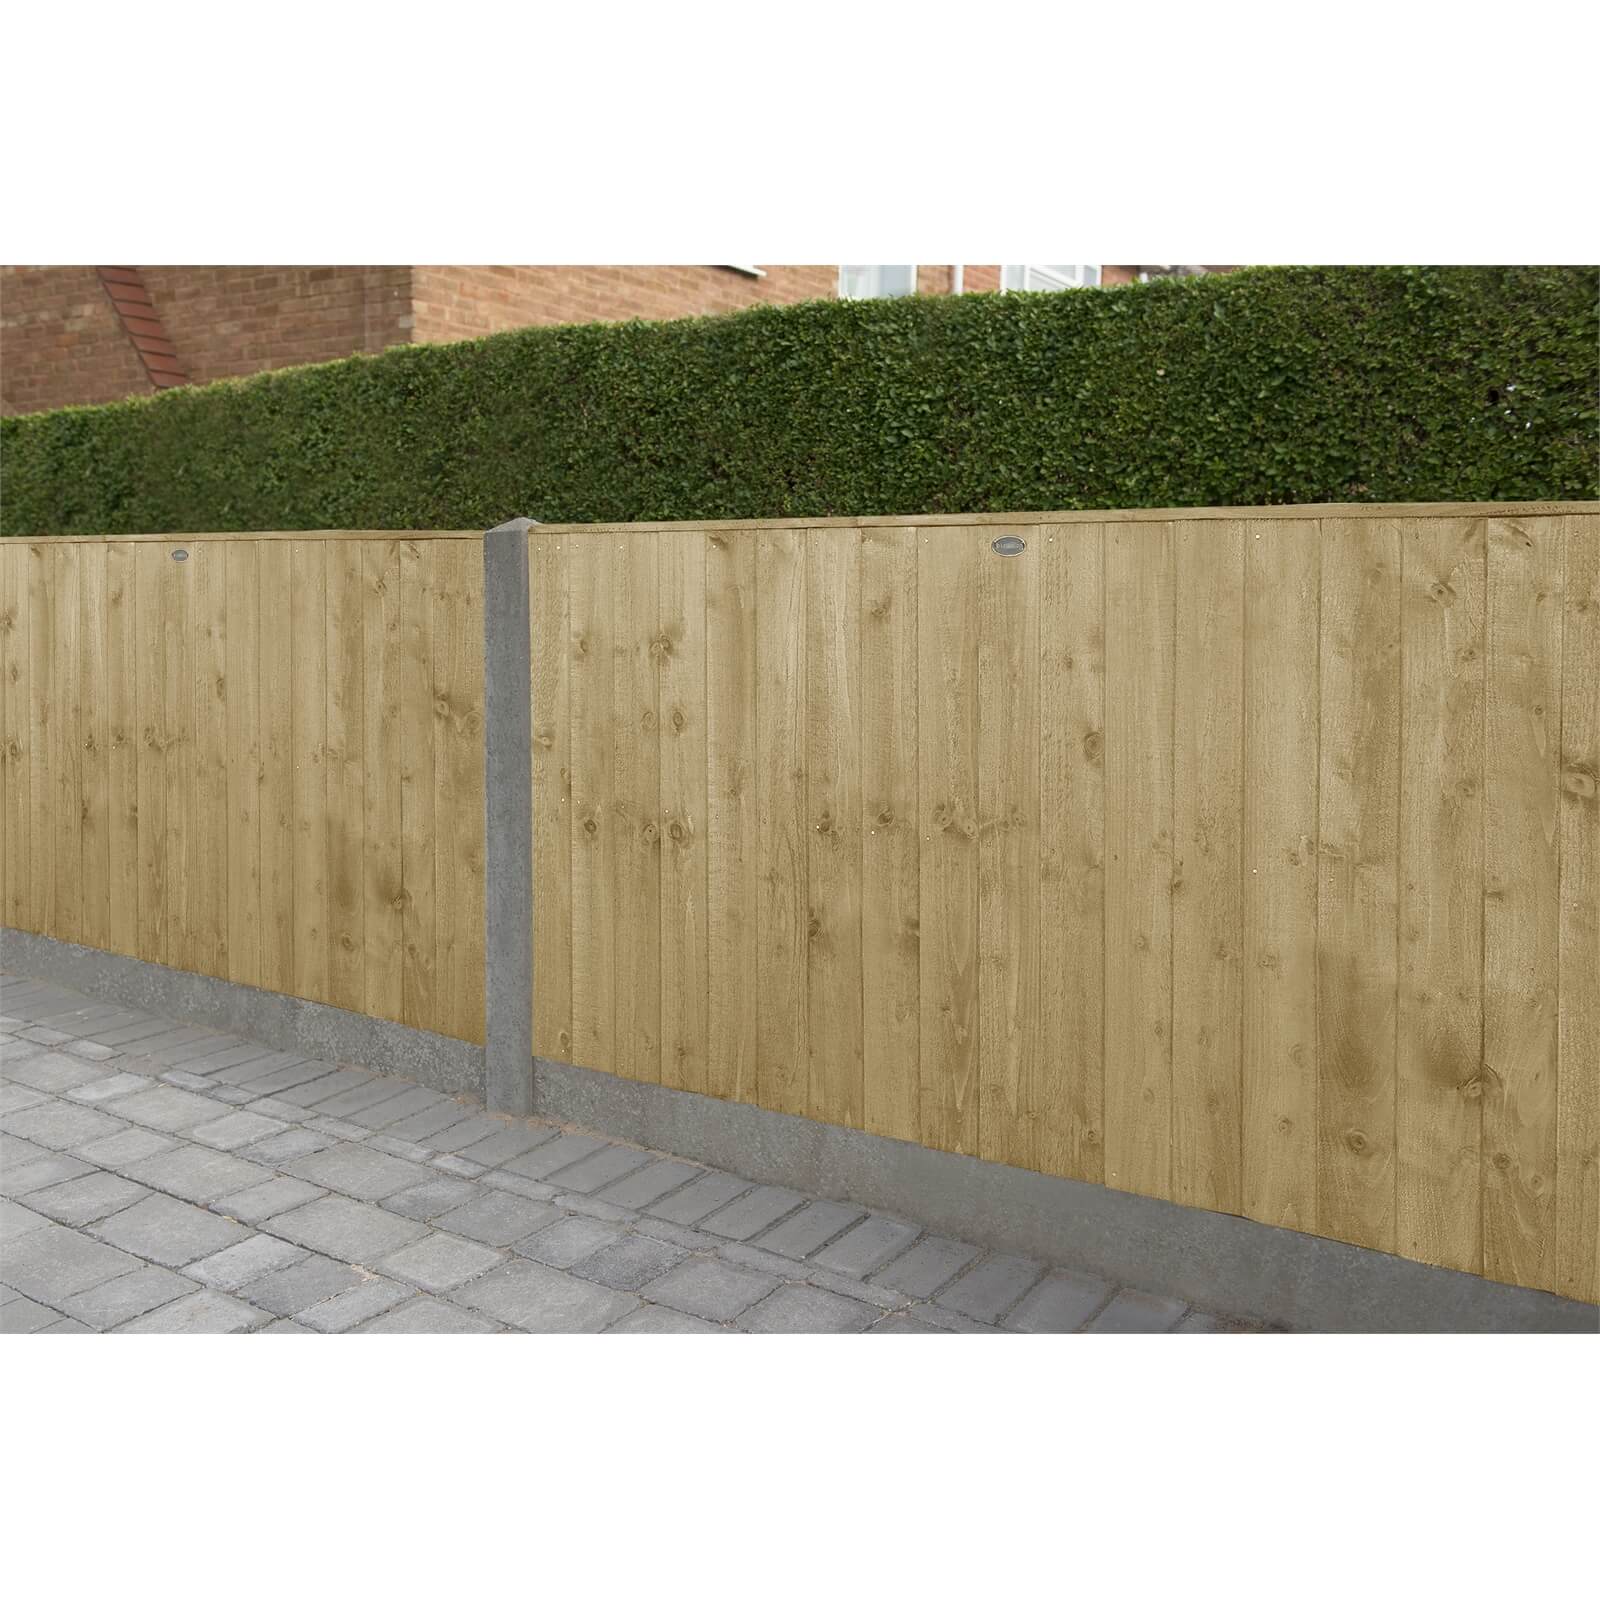 6ft x 3ft (1.83m x 0.93m) Pressure Treated Featheredge Fence Panel - Pack of 3